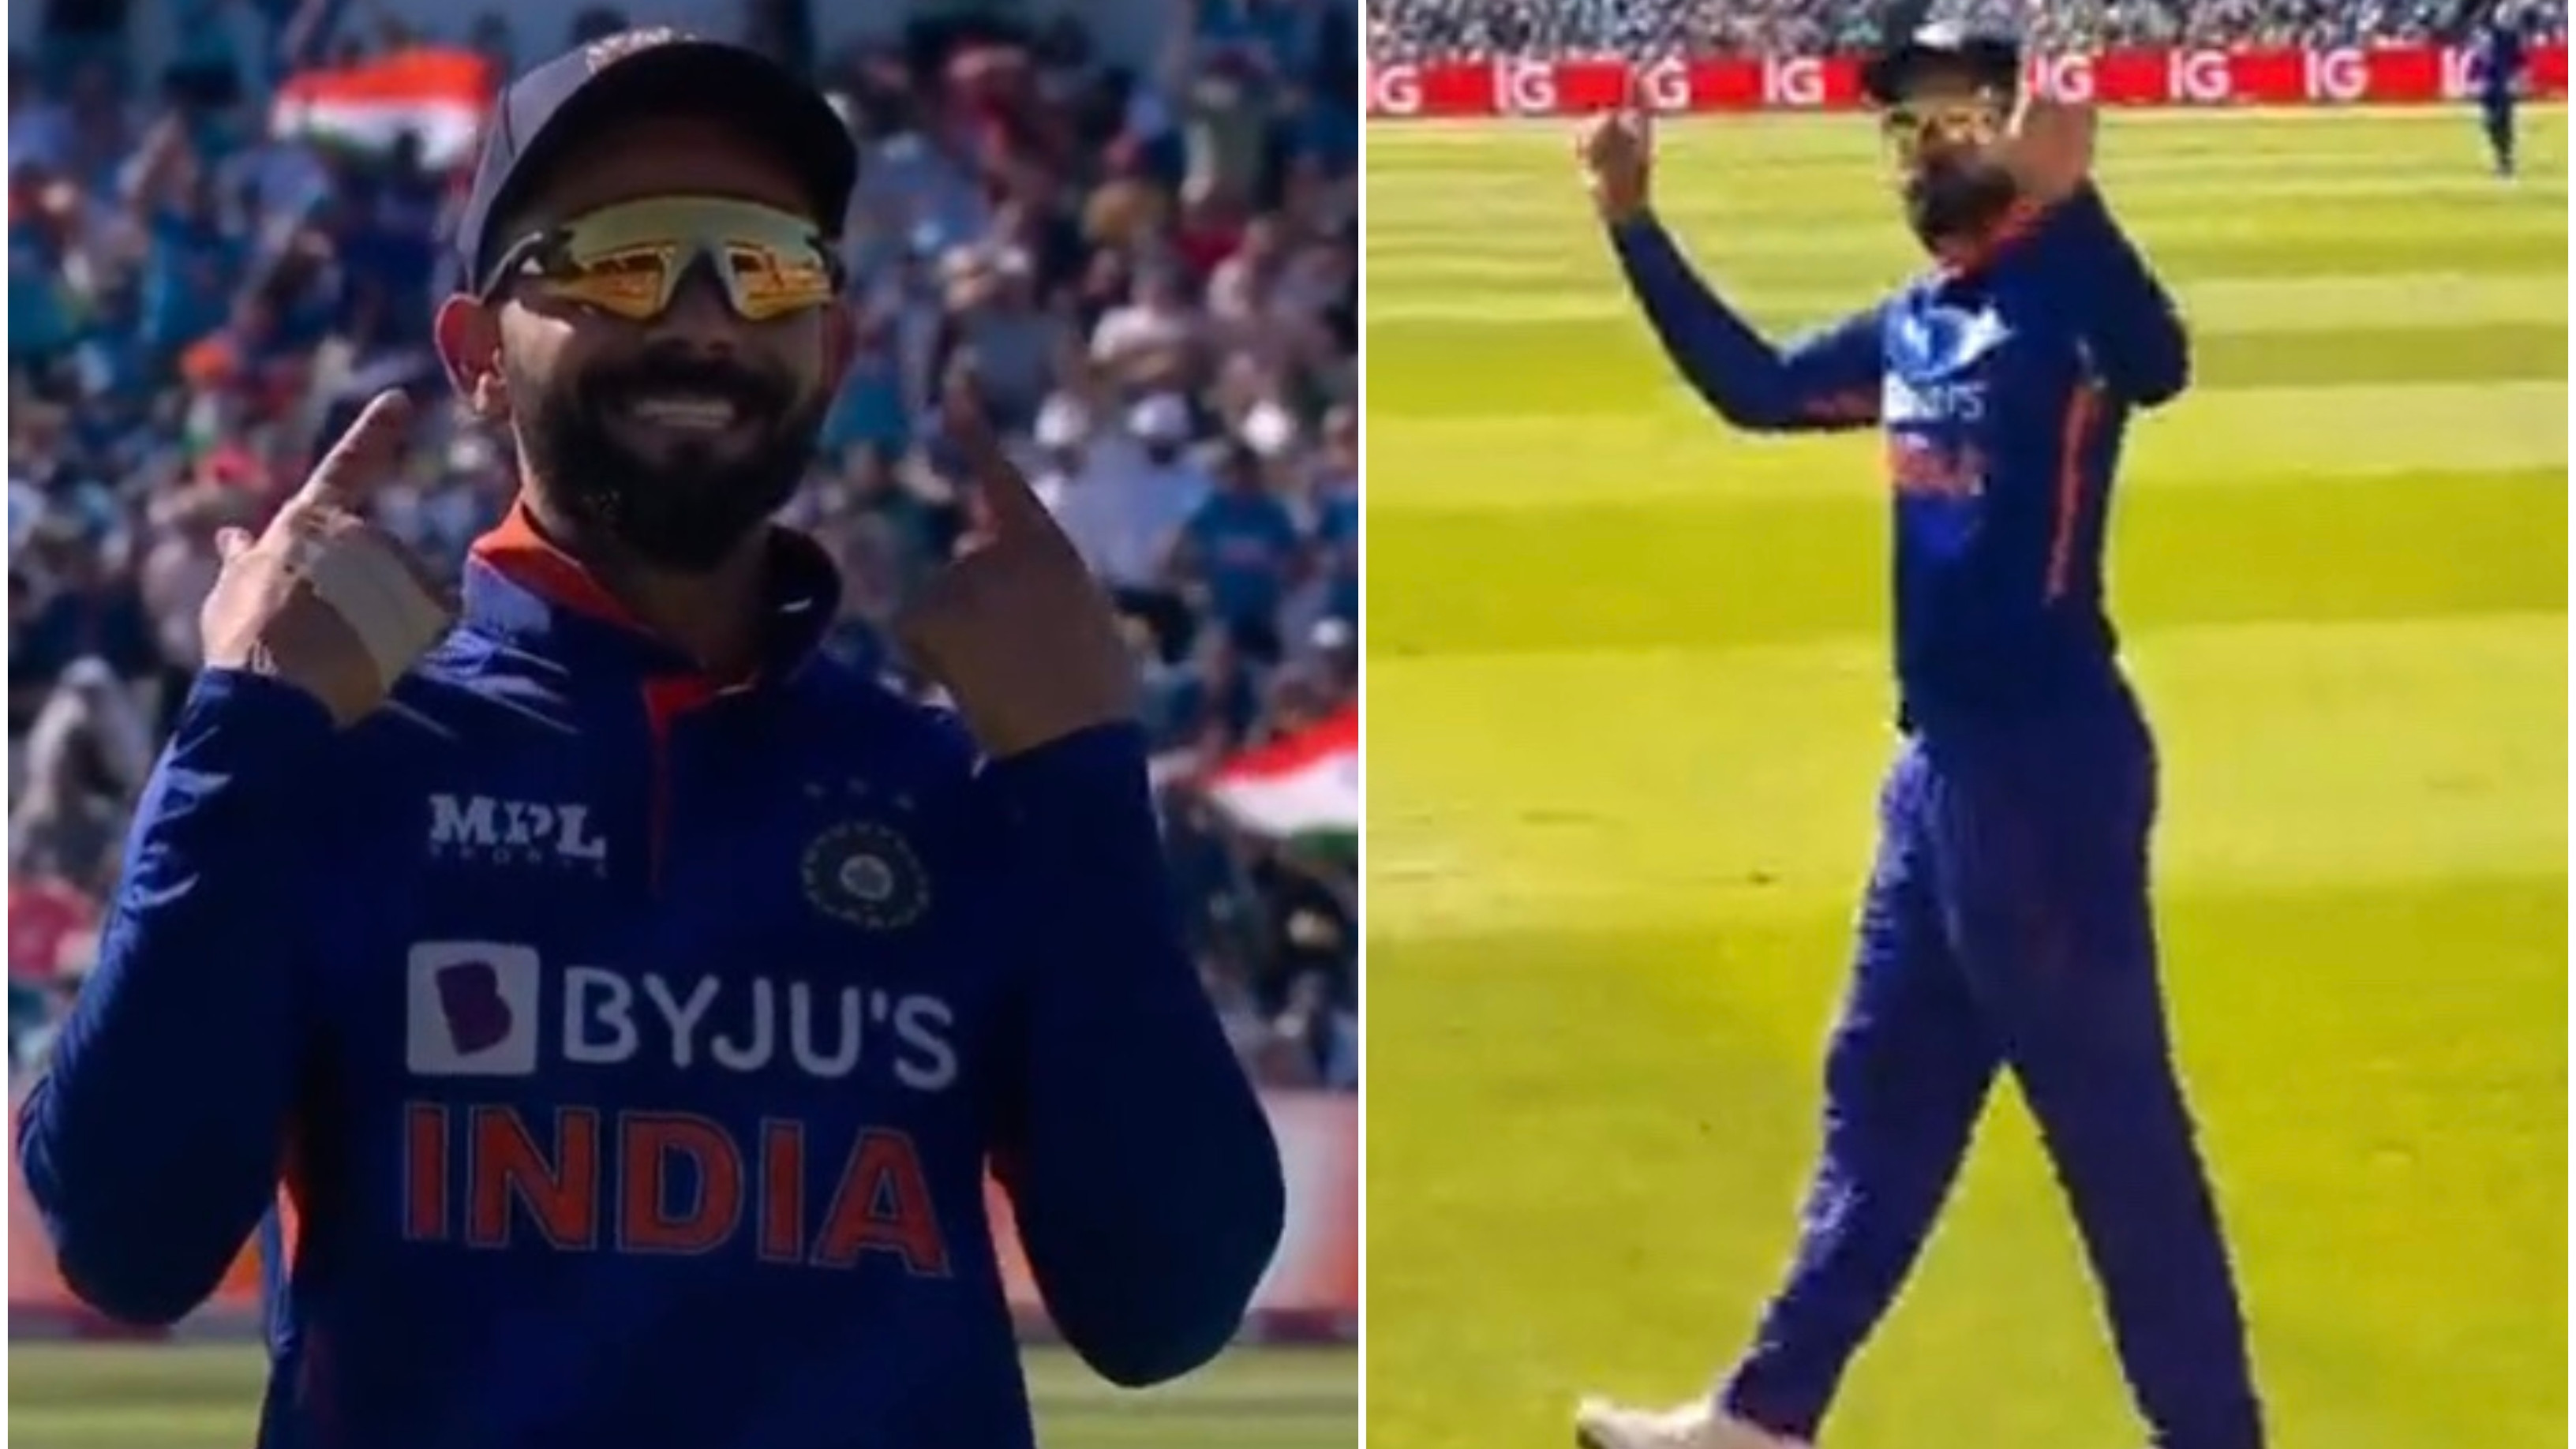 ENG v IND 2022: WATCH – Virat Kohli flaunts his ‘Bhangra’ skills, smiles and waves to fans during 2nd T20I